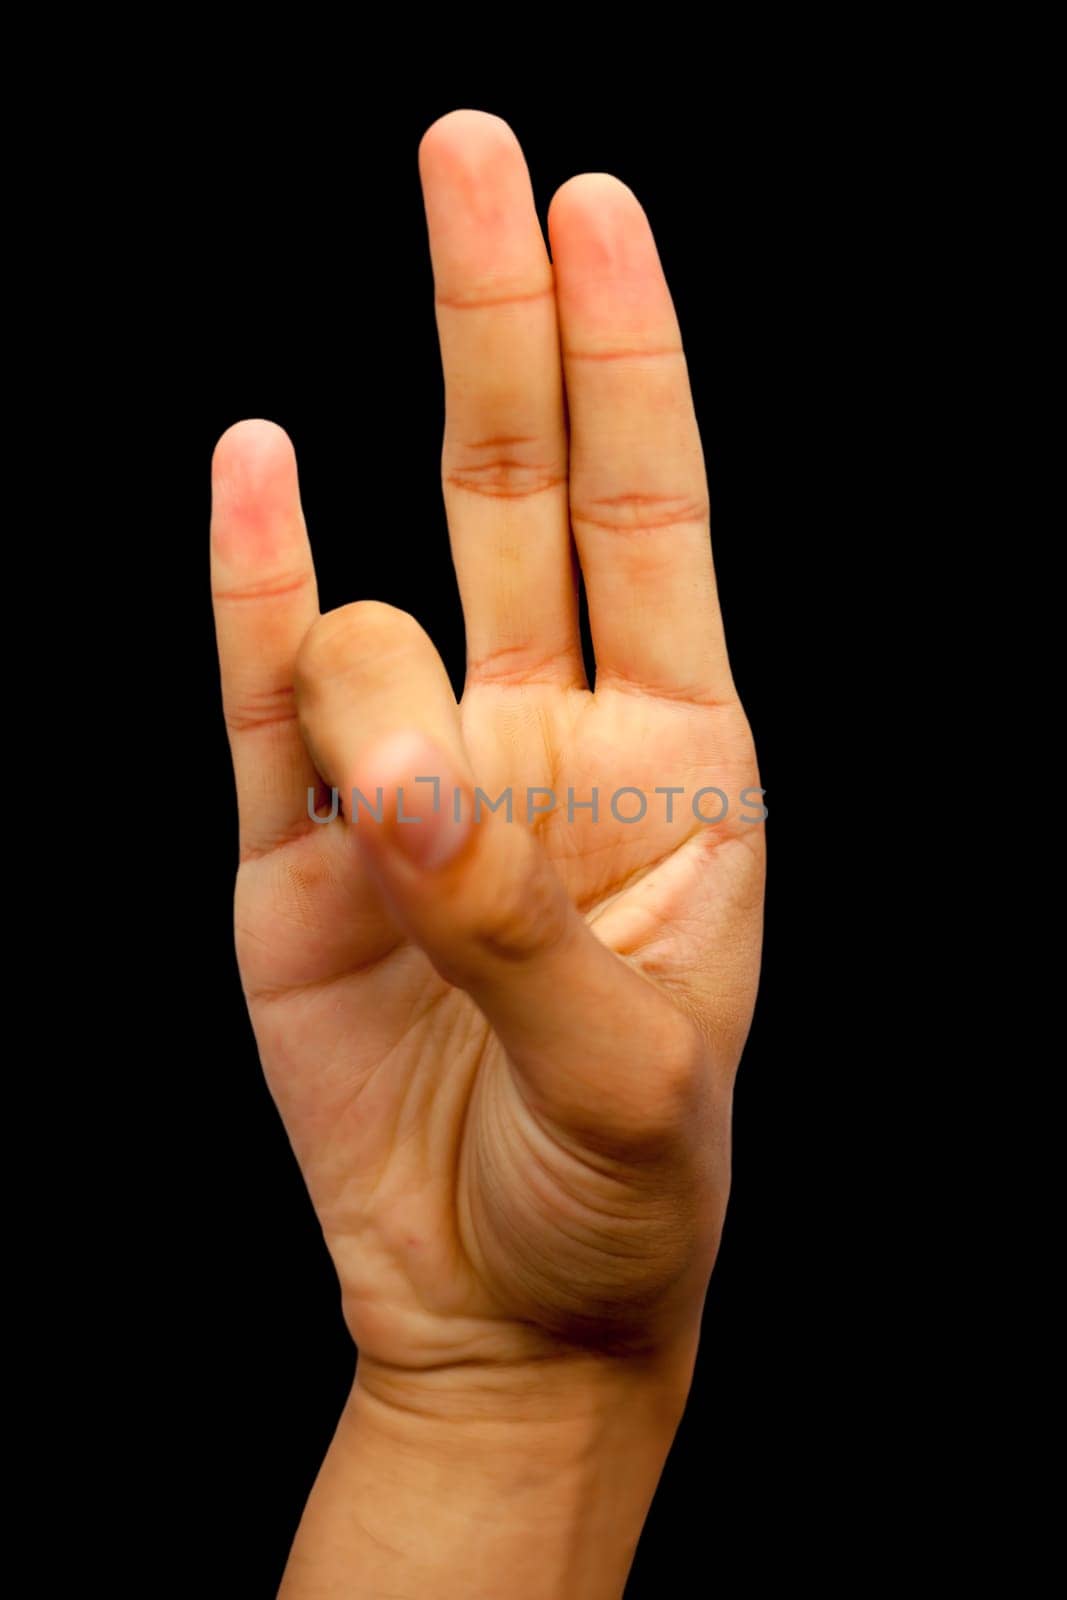 Prithvi Mudra is demonstrated by a male hand isolated on black background.